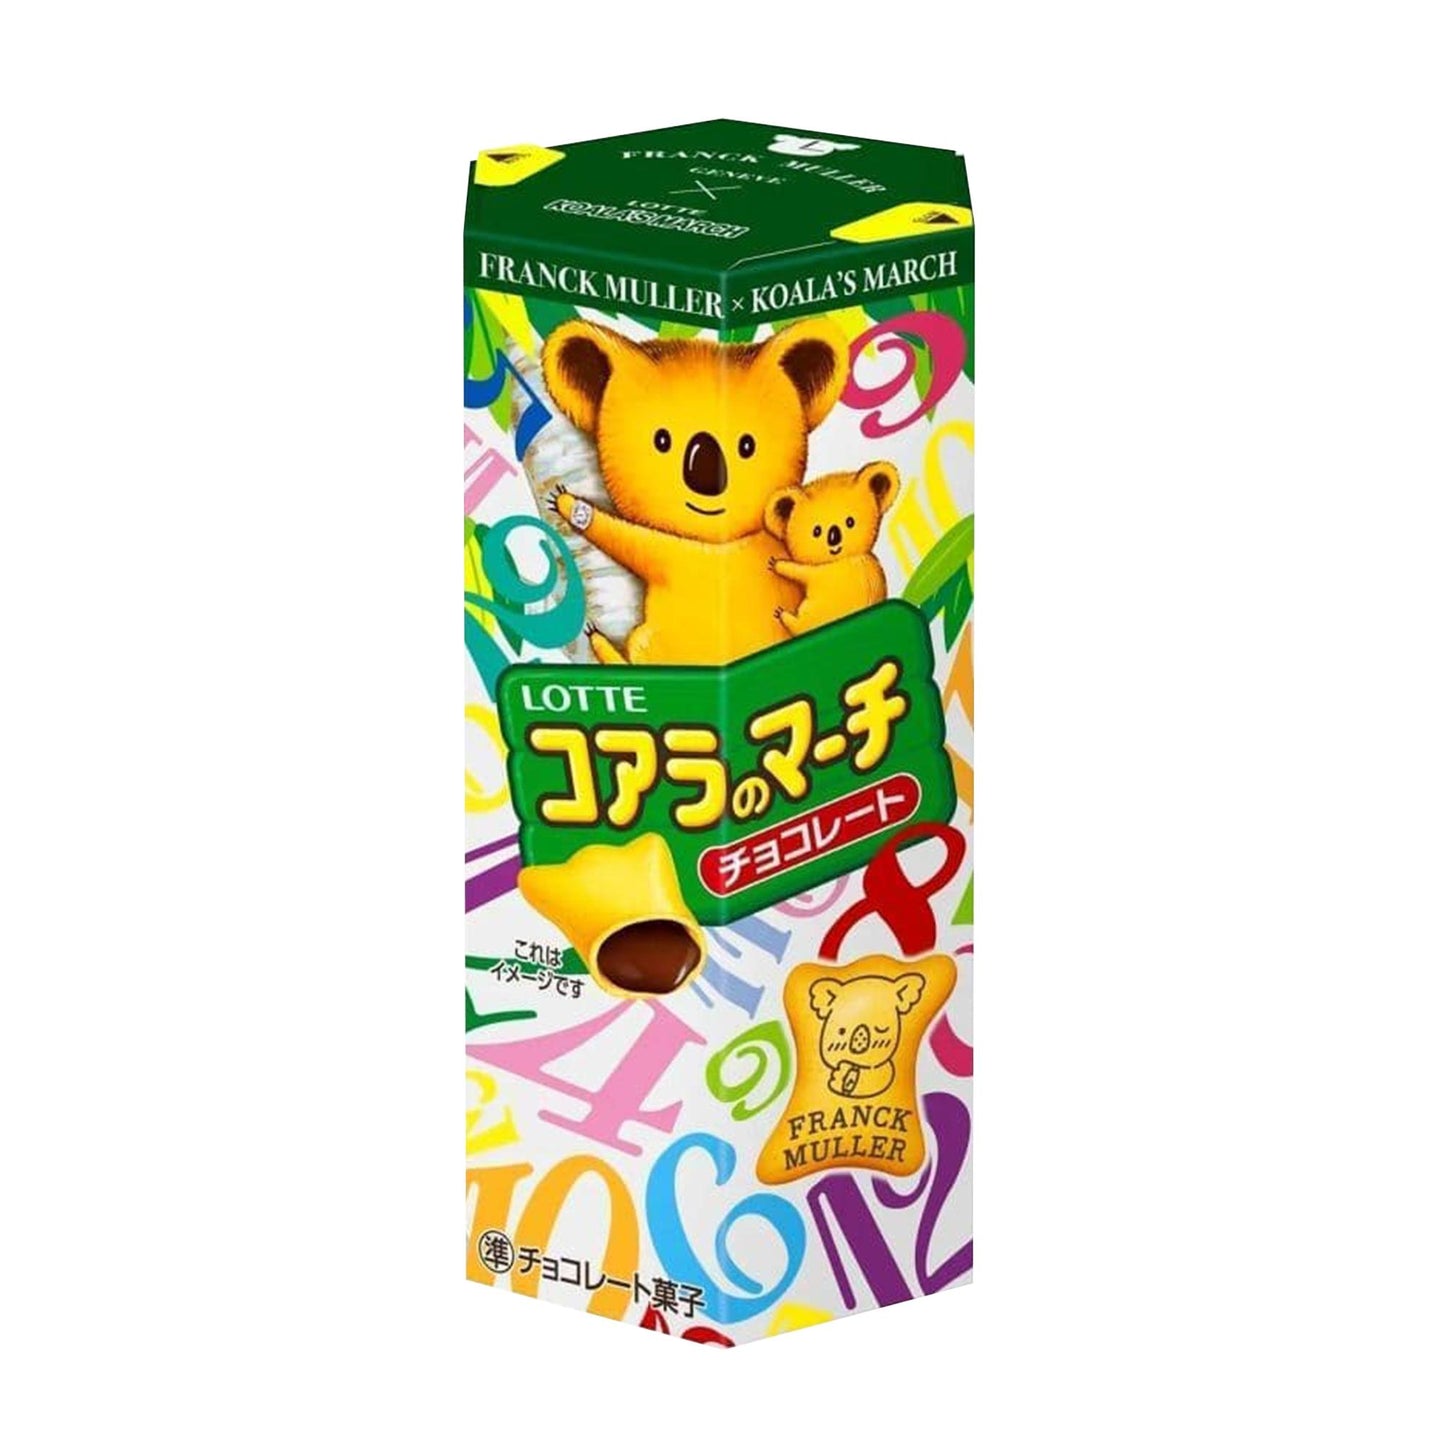 Lotte Koala's March Biscuits